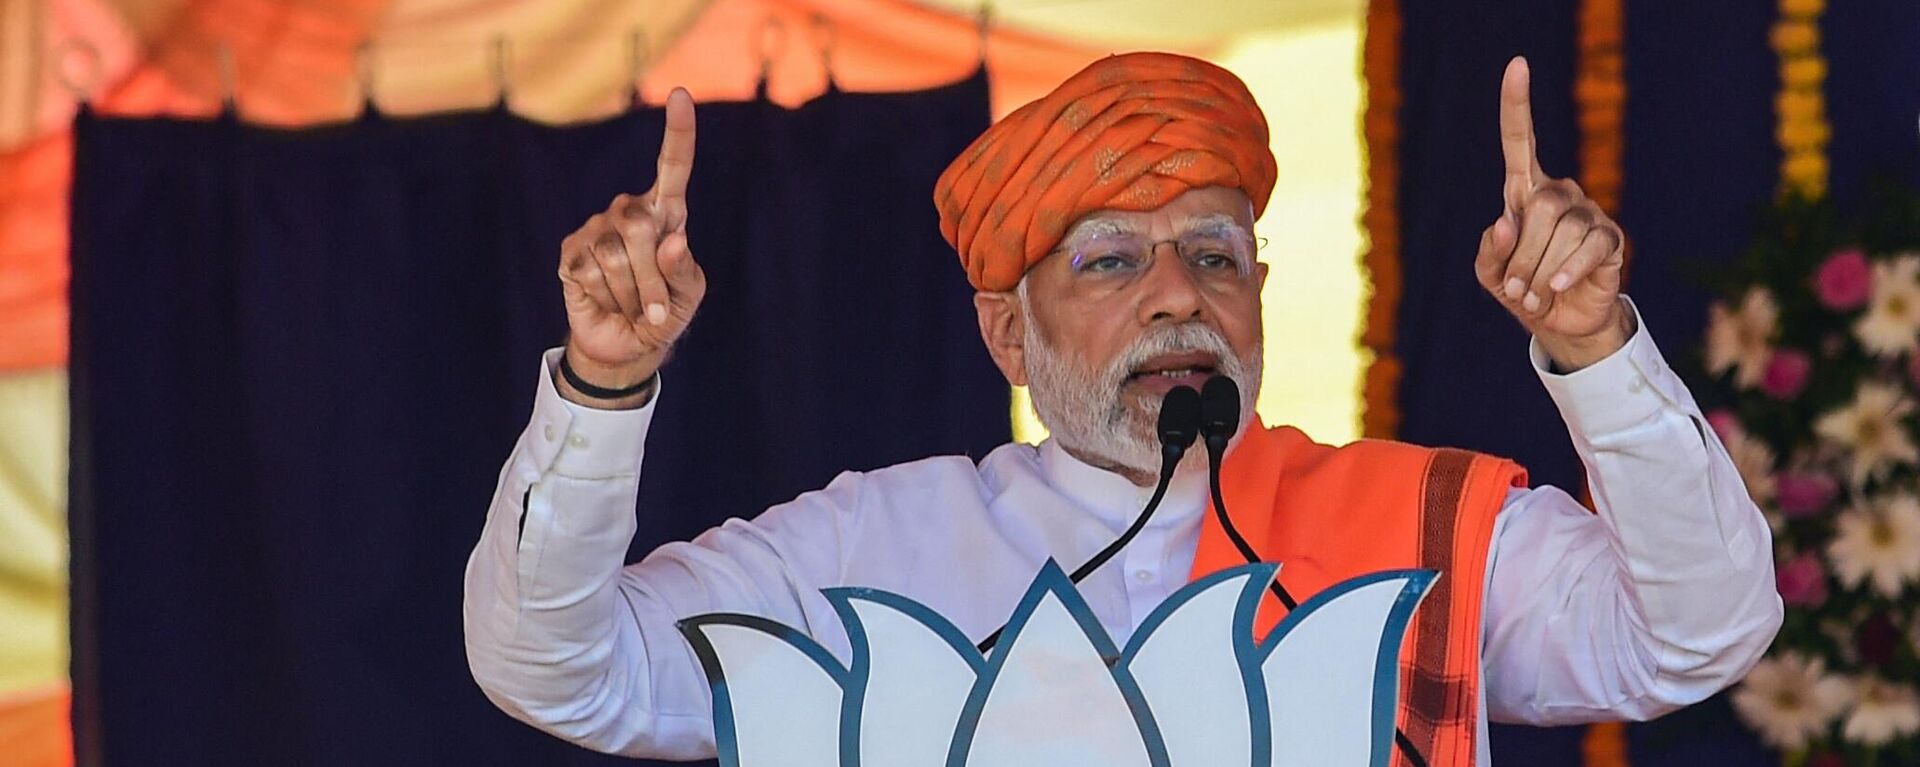 India's Prime Minister Narendra Modi addresses a gathering during a Bhartiya Janata Party (BJP) rally ahead of Gujarat state elections at Dehgam, some 40 kms from Ahmedabad on November 24, 2022. - Sputnik International, 1920, 29.11.2022